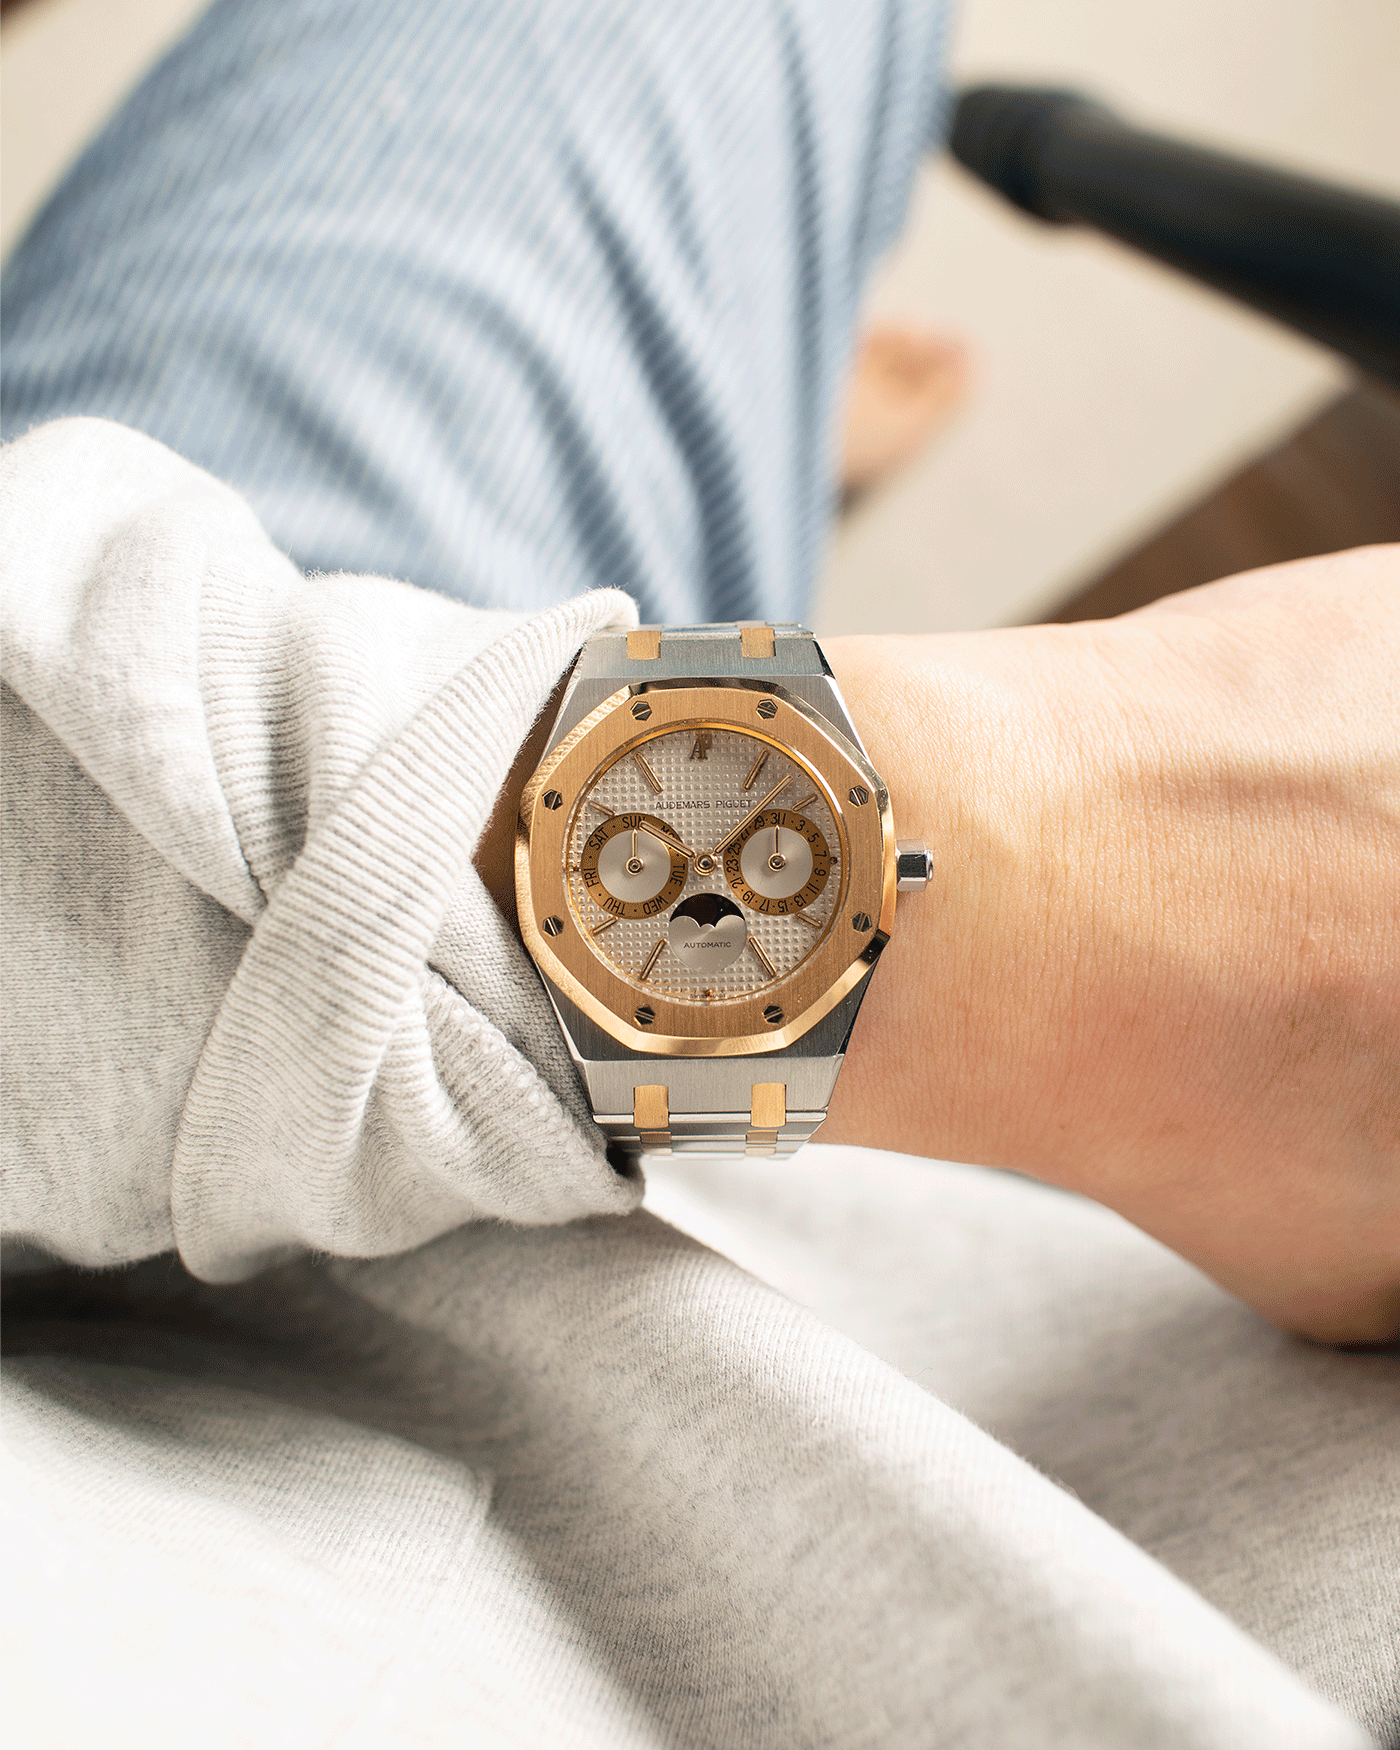 Brand: Audemars Piguet Year: 1980’s Model: Royal Oak Reference Number: 25594 Material: Stainless Steel and 18k Yellow Gold Movement: Cal 2124 Case Diameter: 36mm Bracelet: Audemars Piguet Stainless Steel Integrated Bracelet